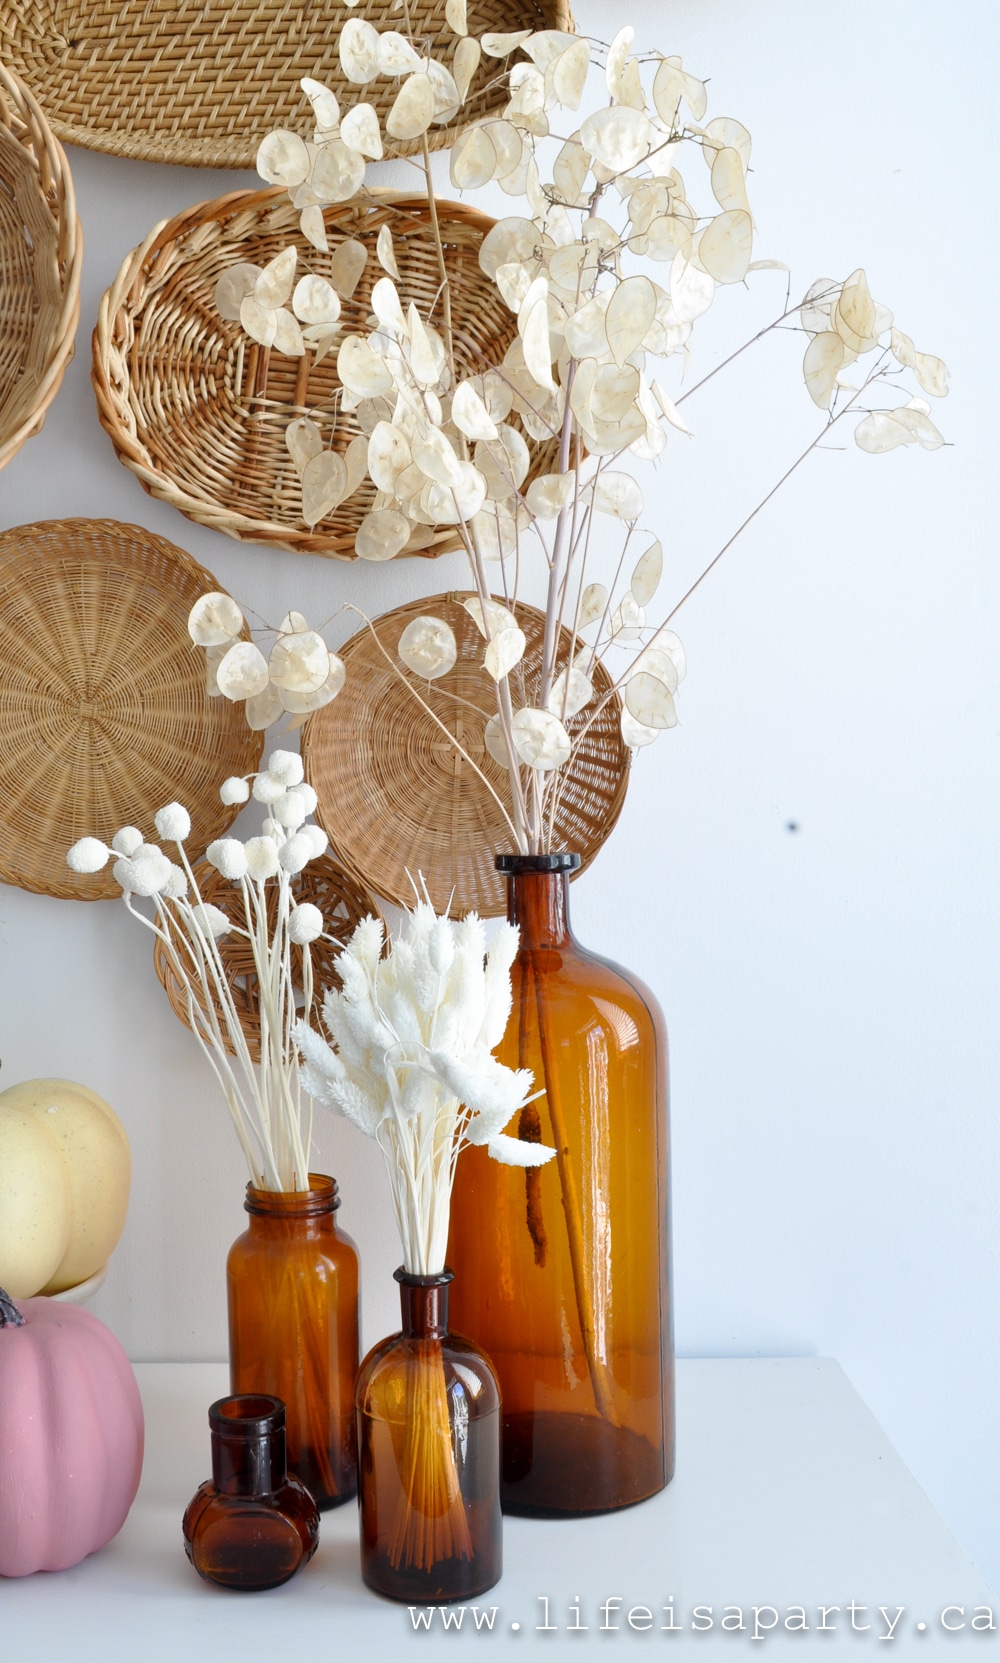 vintage amber glass bottles with dried flowers